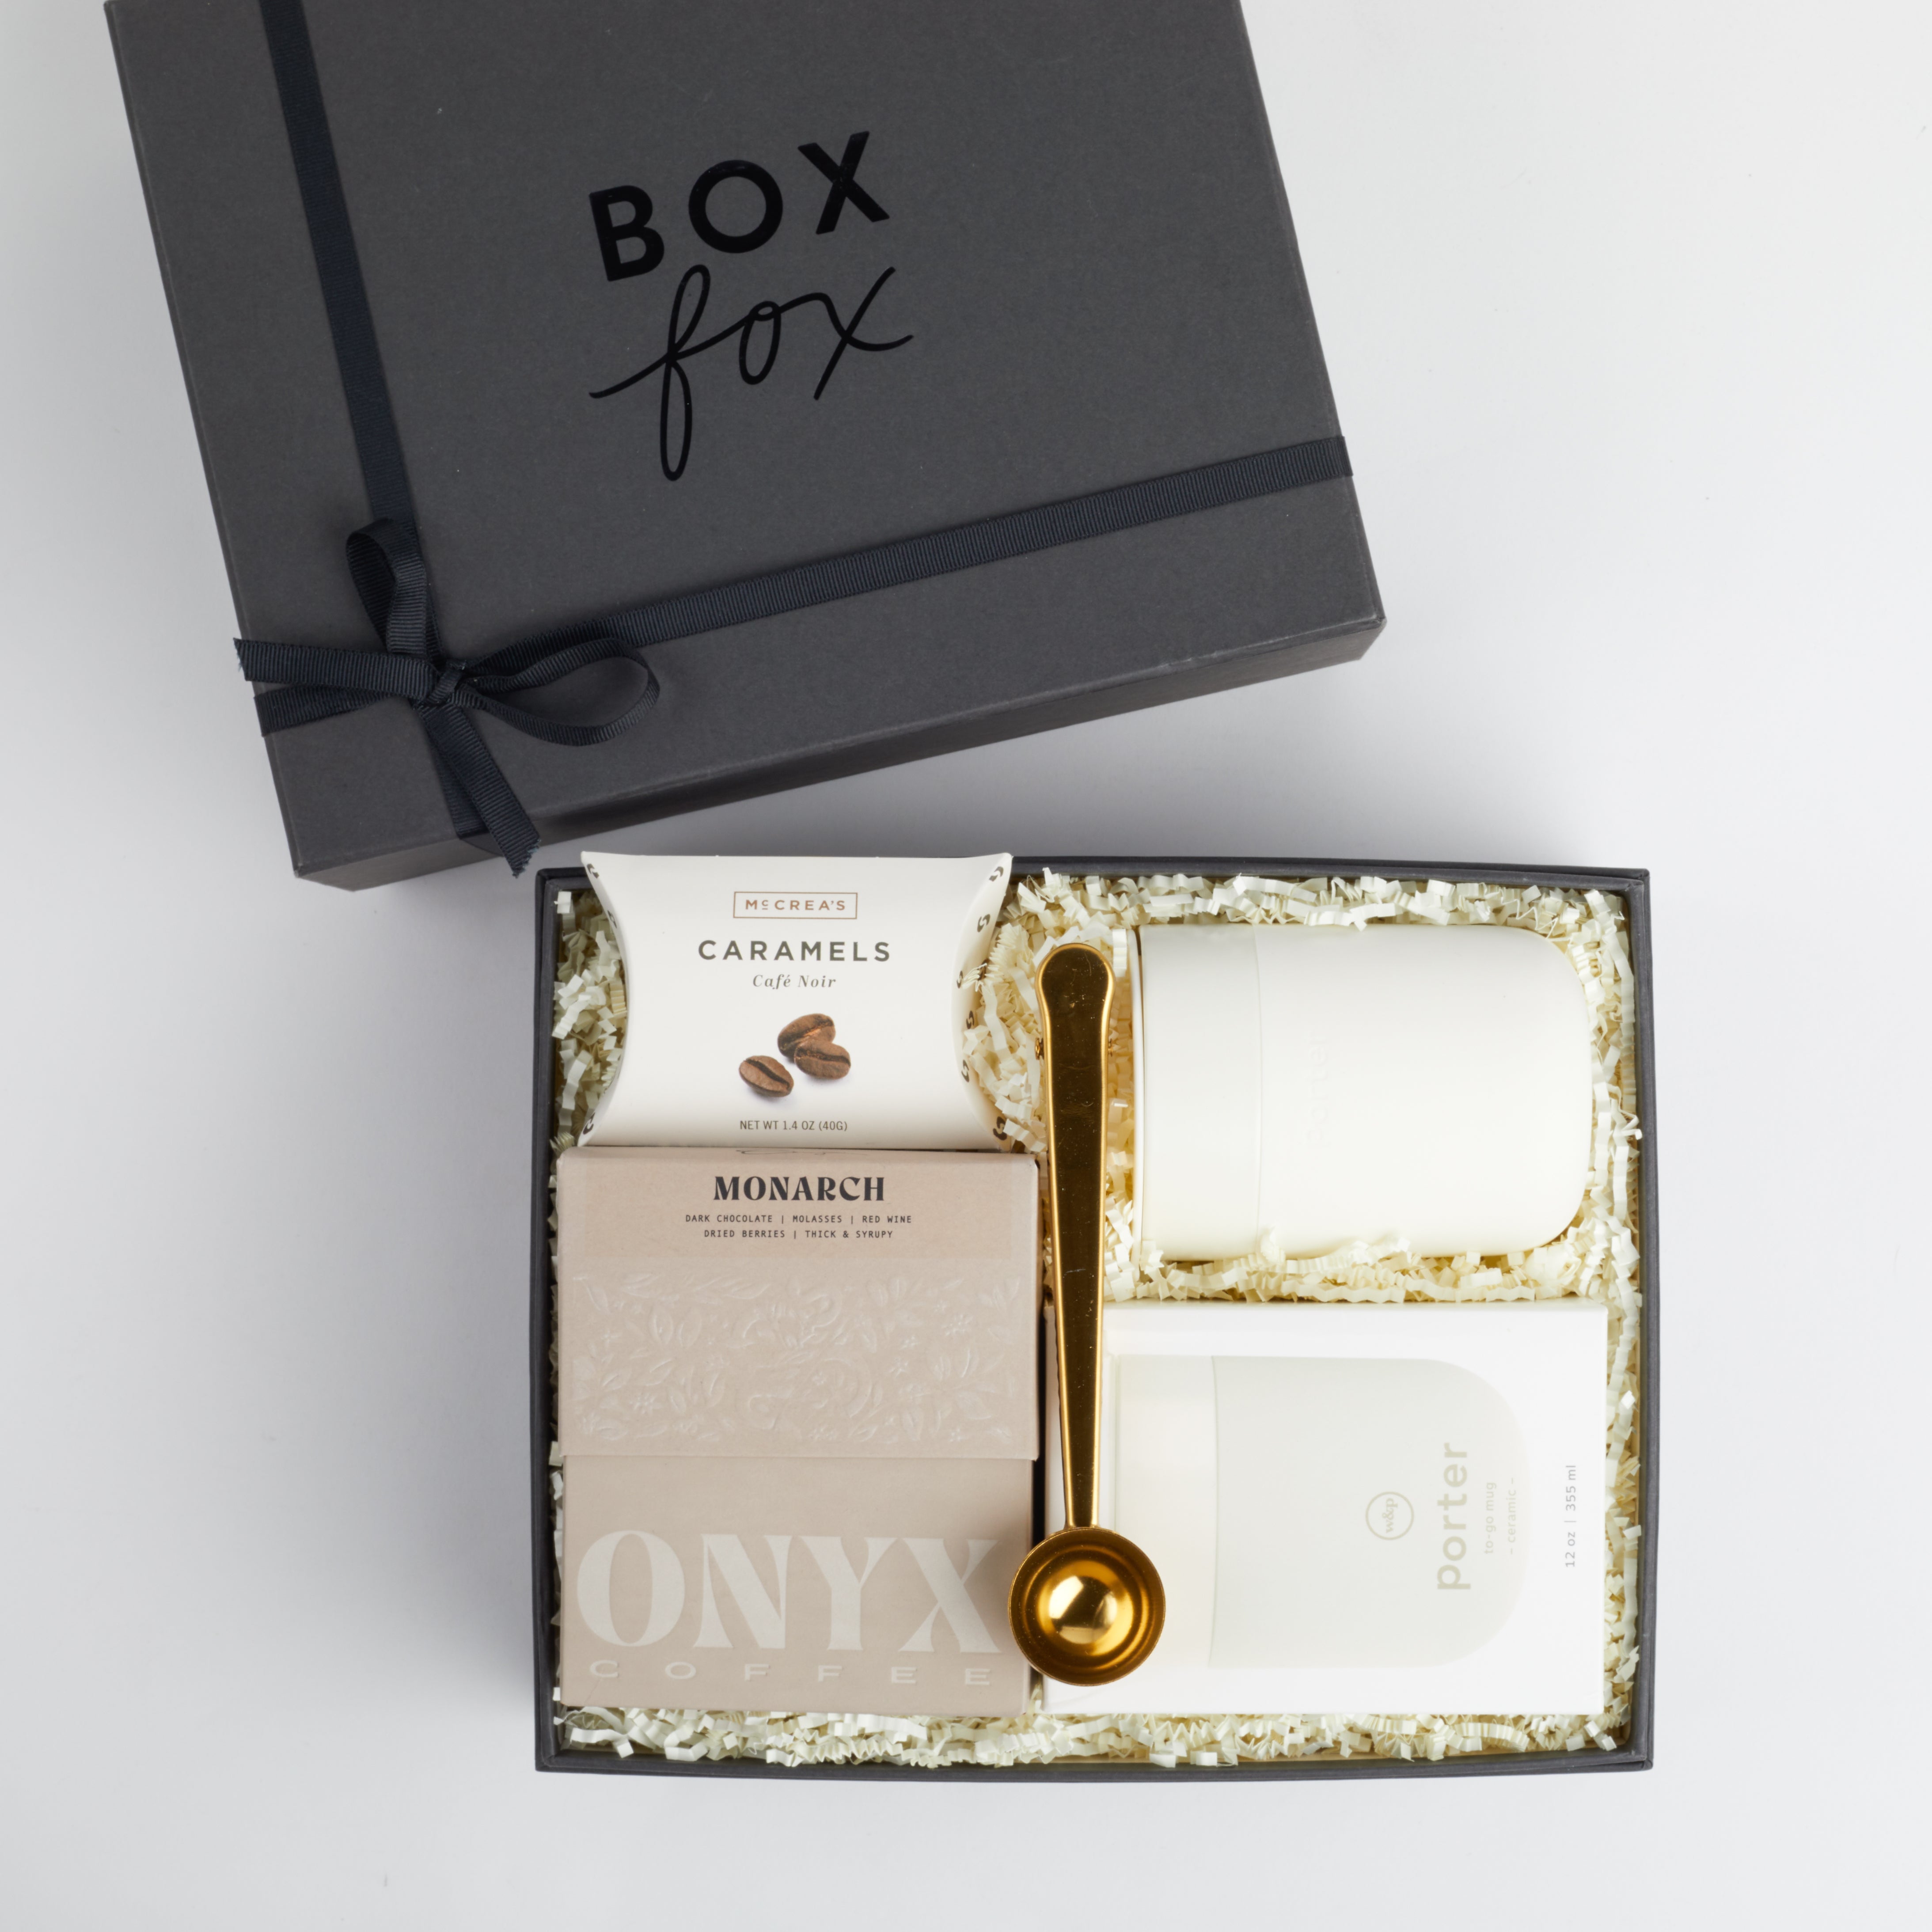 Gold coffee scoop, coffee caramels, cream mug and box of coffee packed in BOXFOX